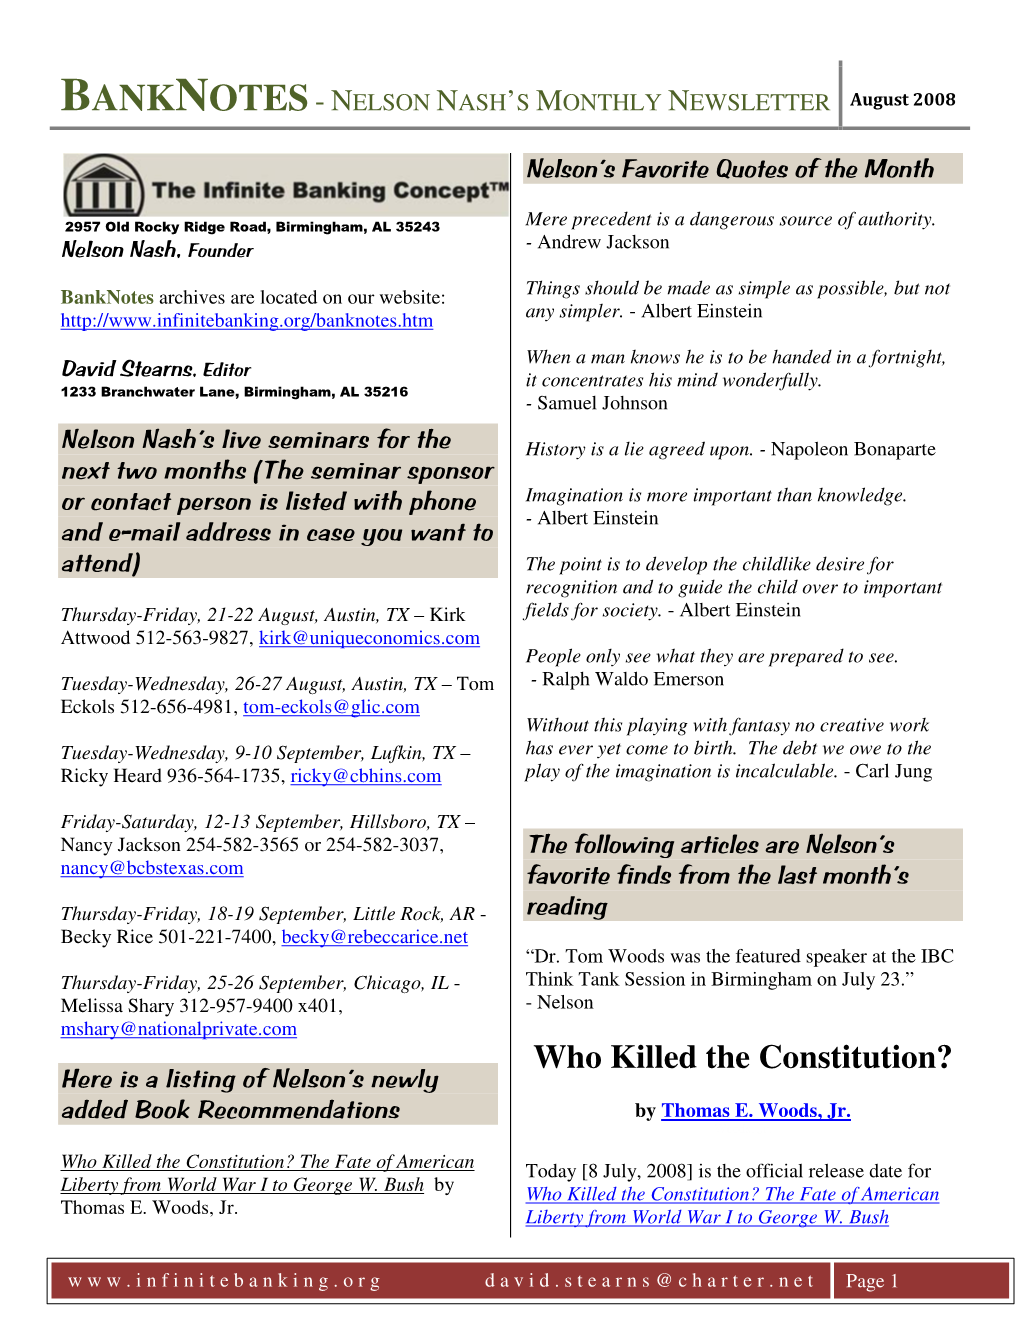 Who Killed the Constitution? Here Is a Listing of Nelson’S Newly Added Book Recommendations by Thomas E